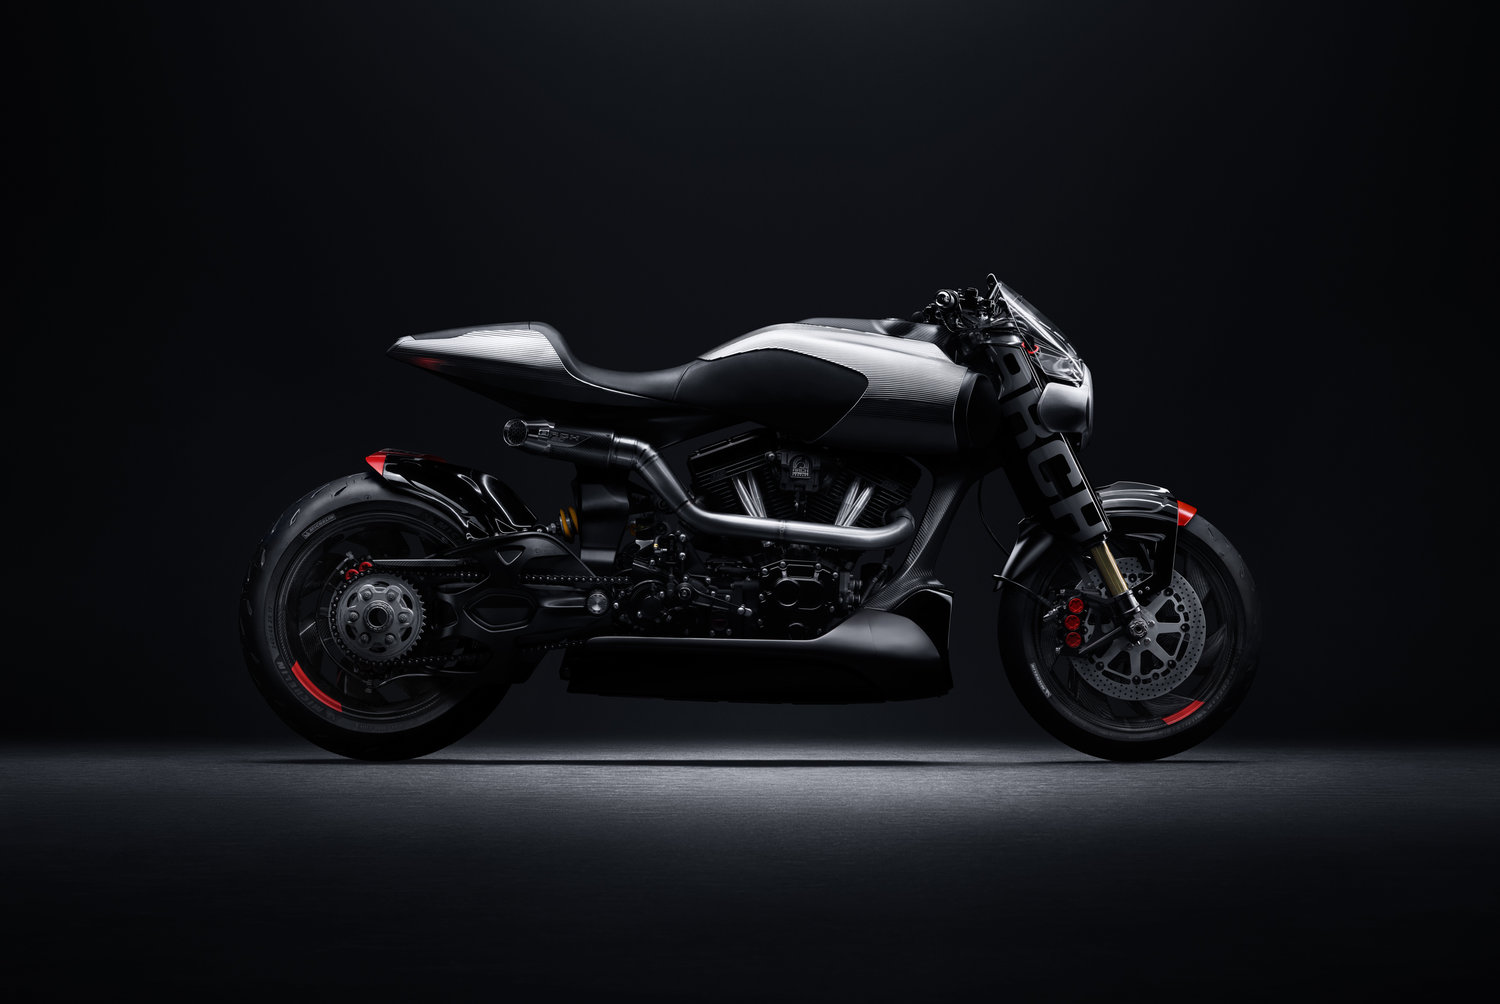 The Latest Cruiser From Keanu Reeves' Arch Motorcycles Is the Sleekest Yet